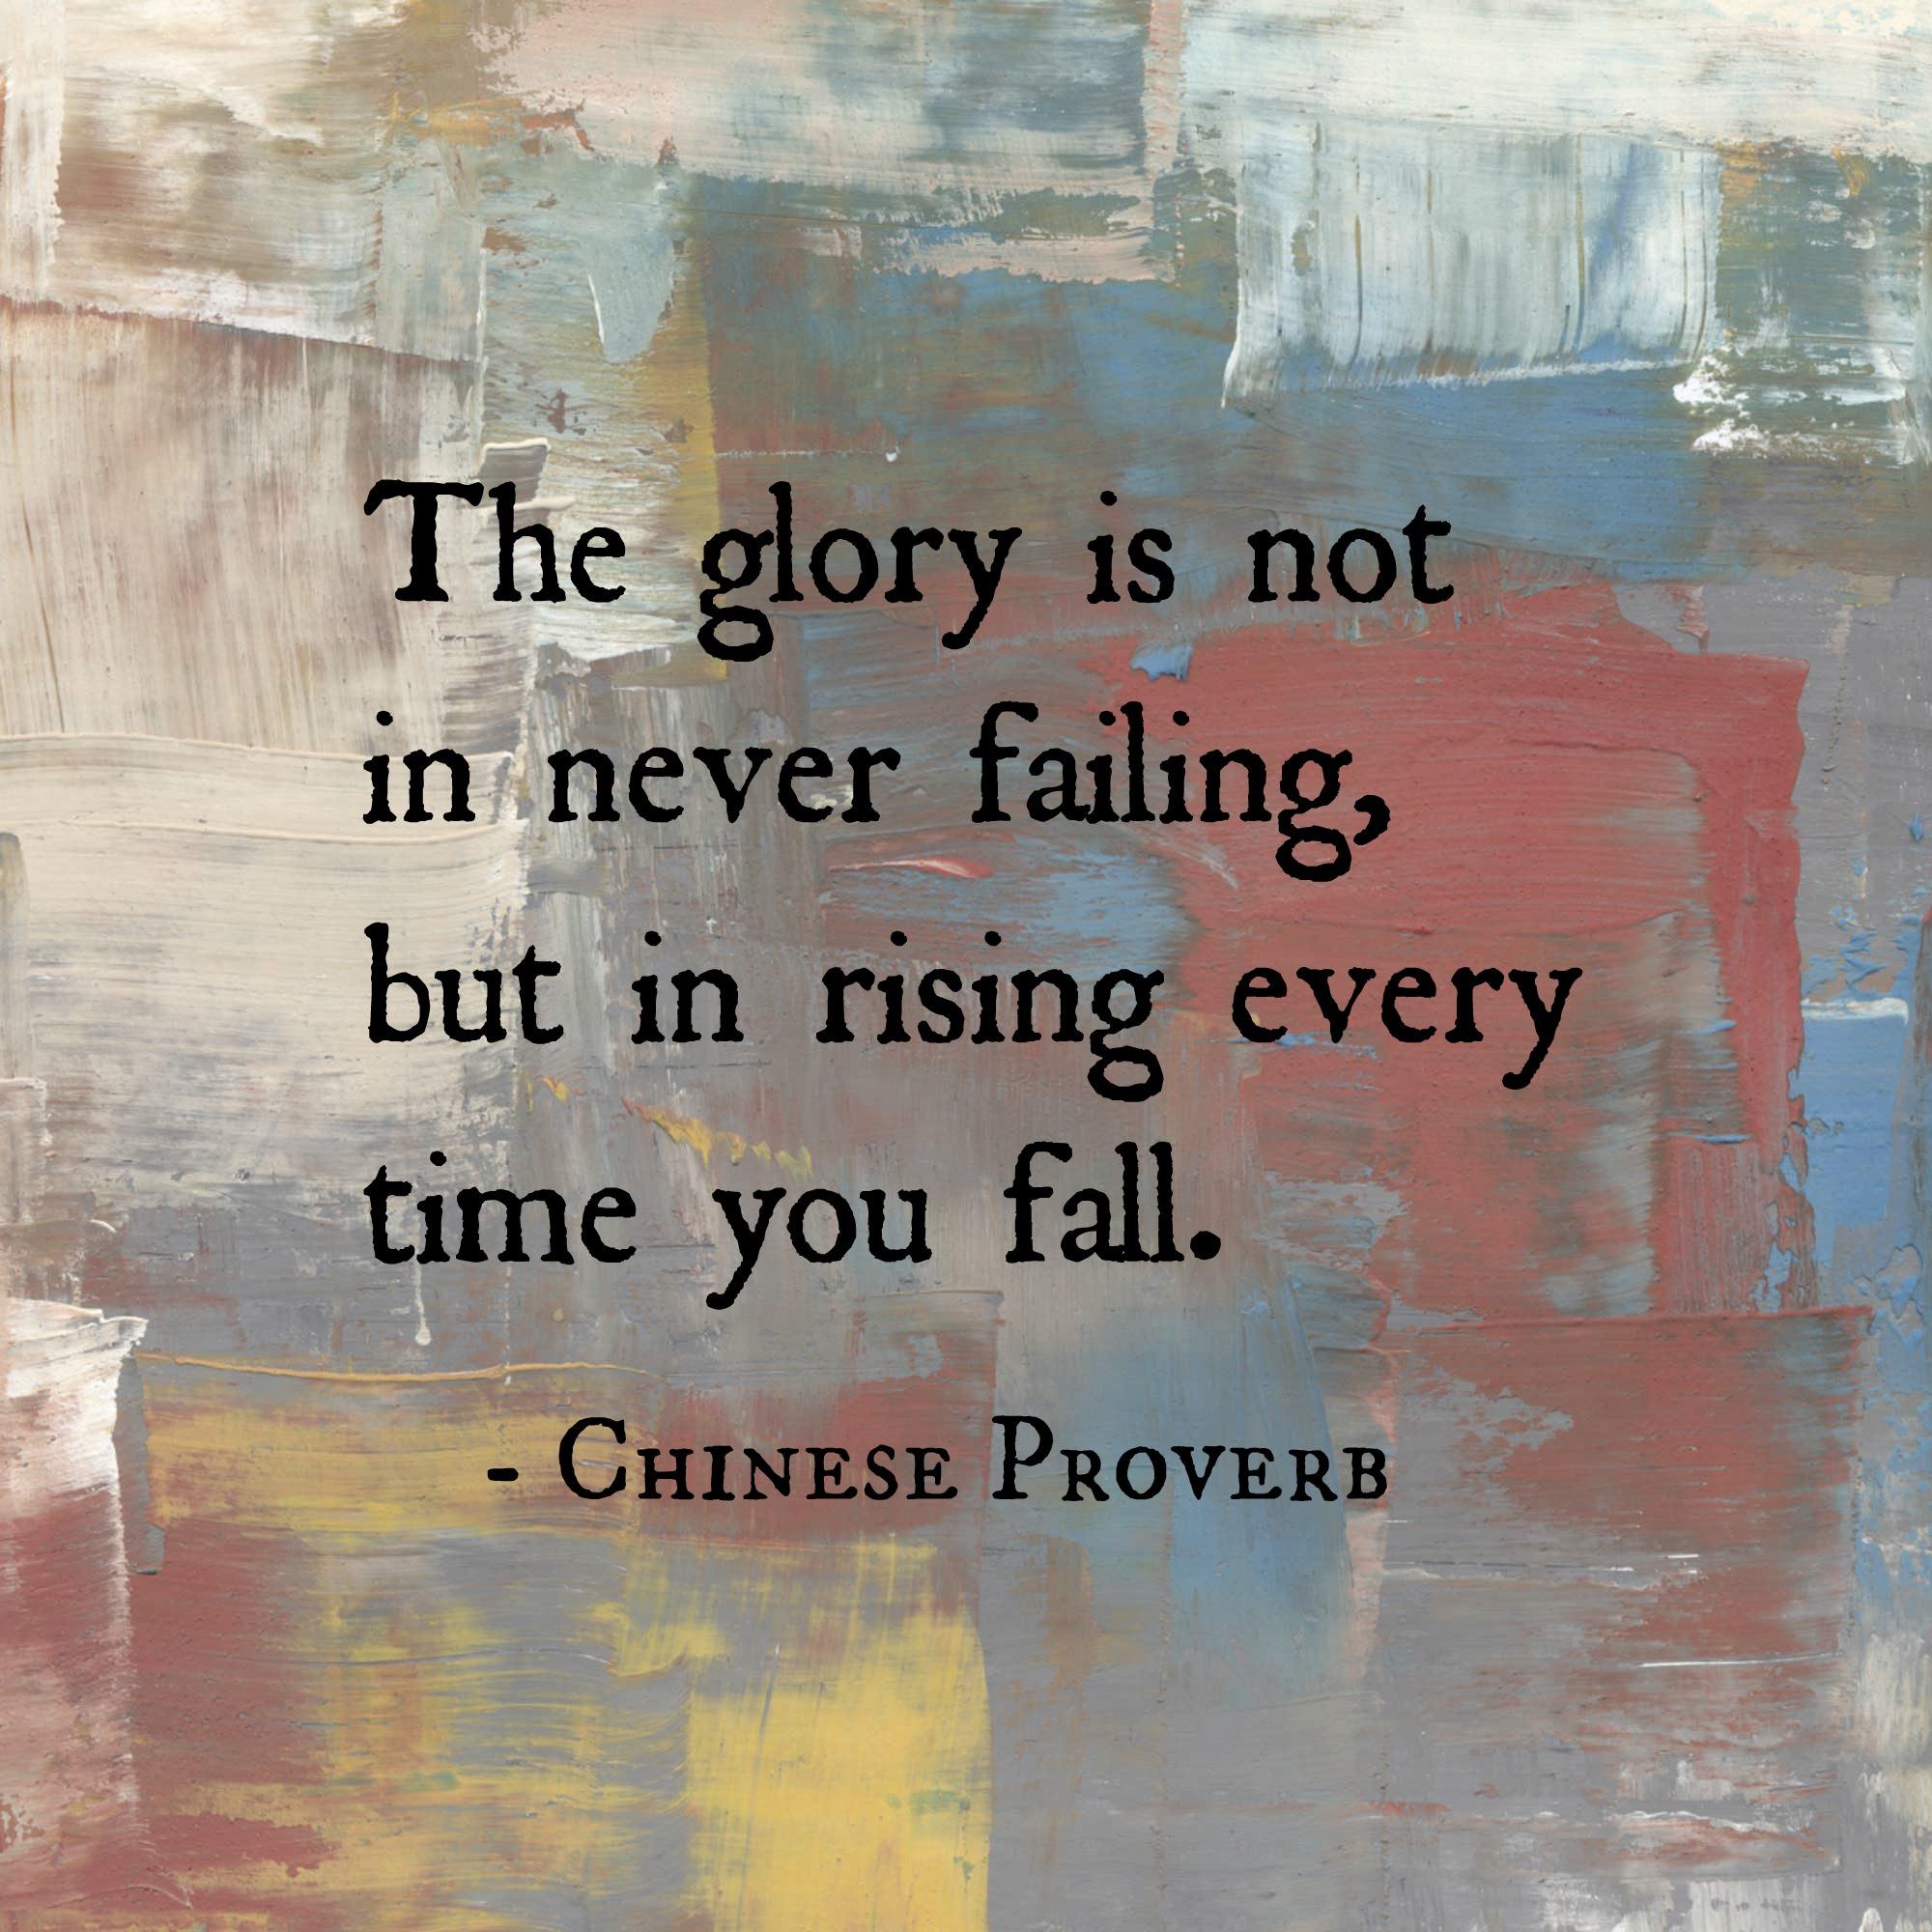 The glory is not in never failing, but in rising every time you fall.